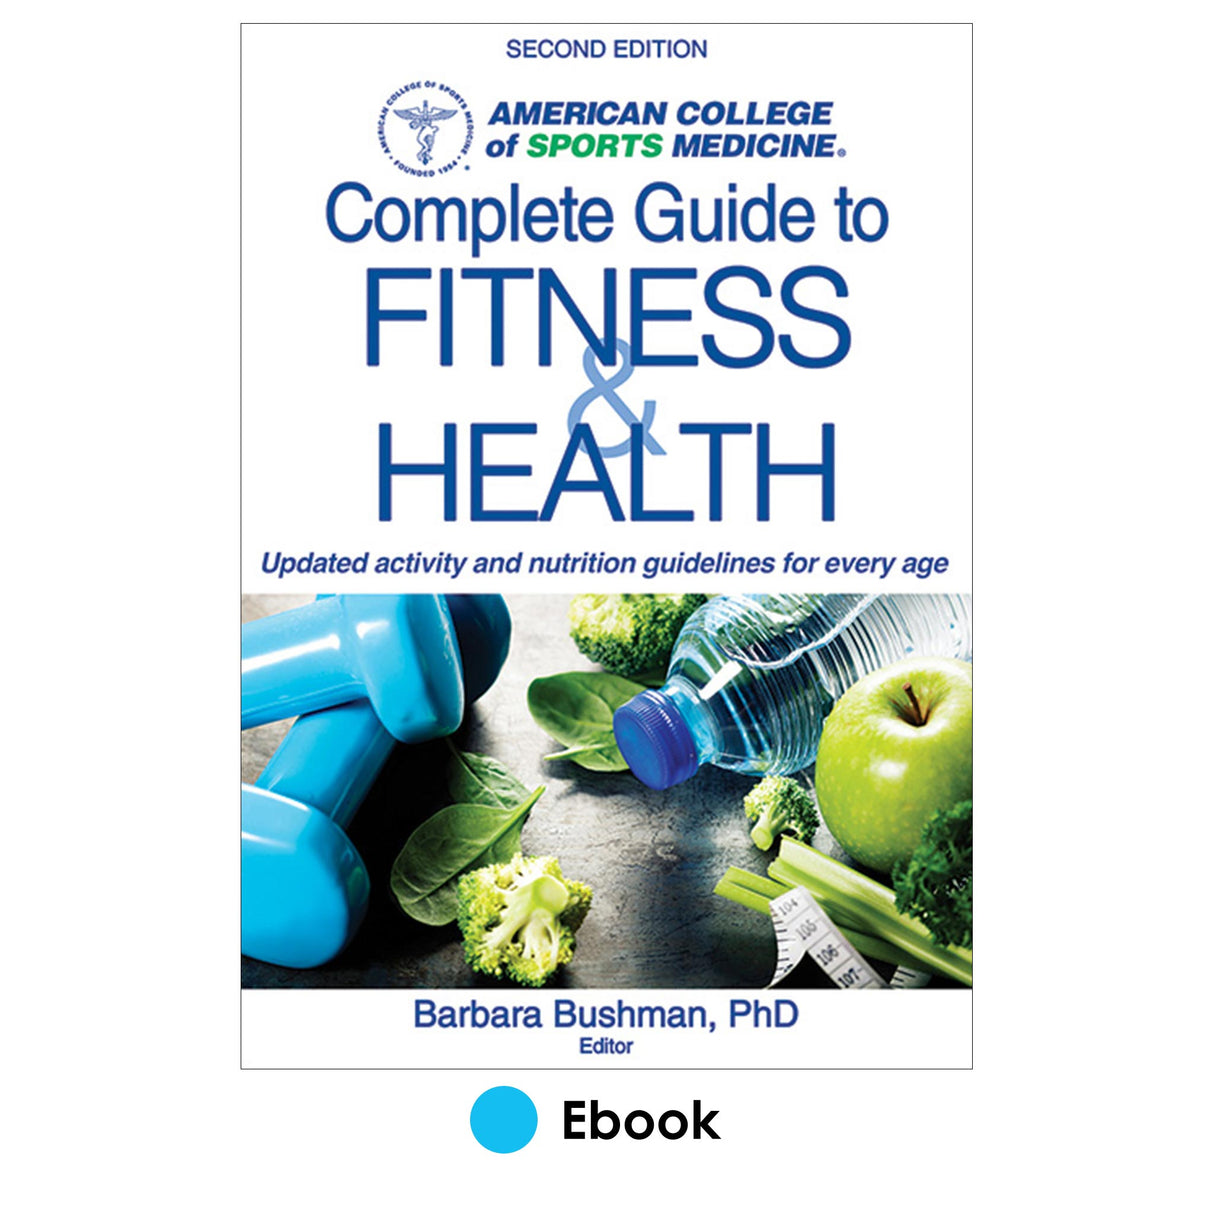 ACSM's Complete Guide to Fitness & Health 2nd Edition PDF